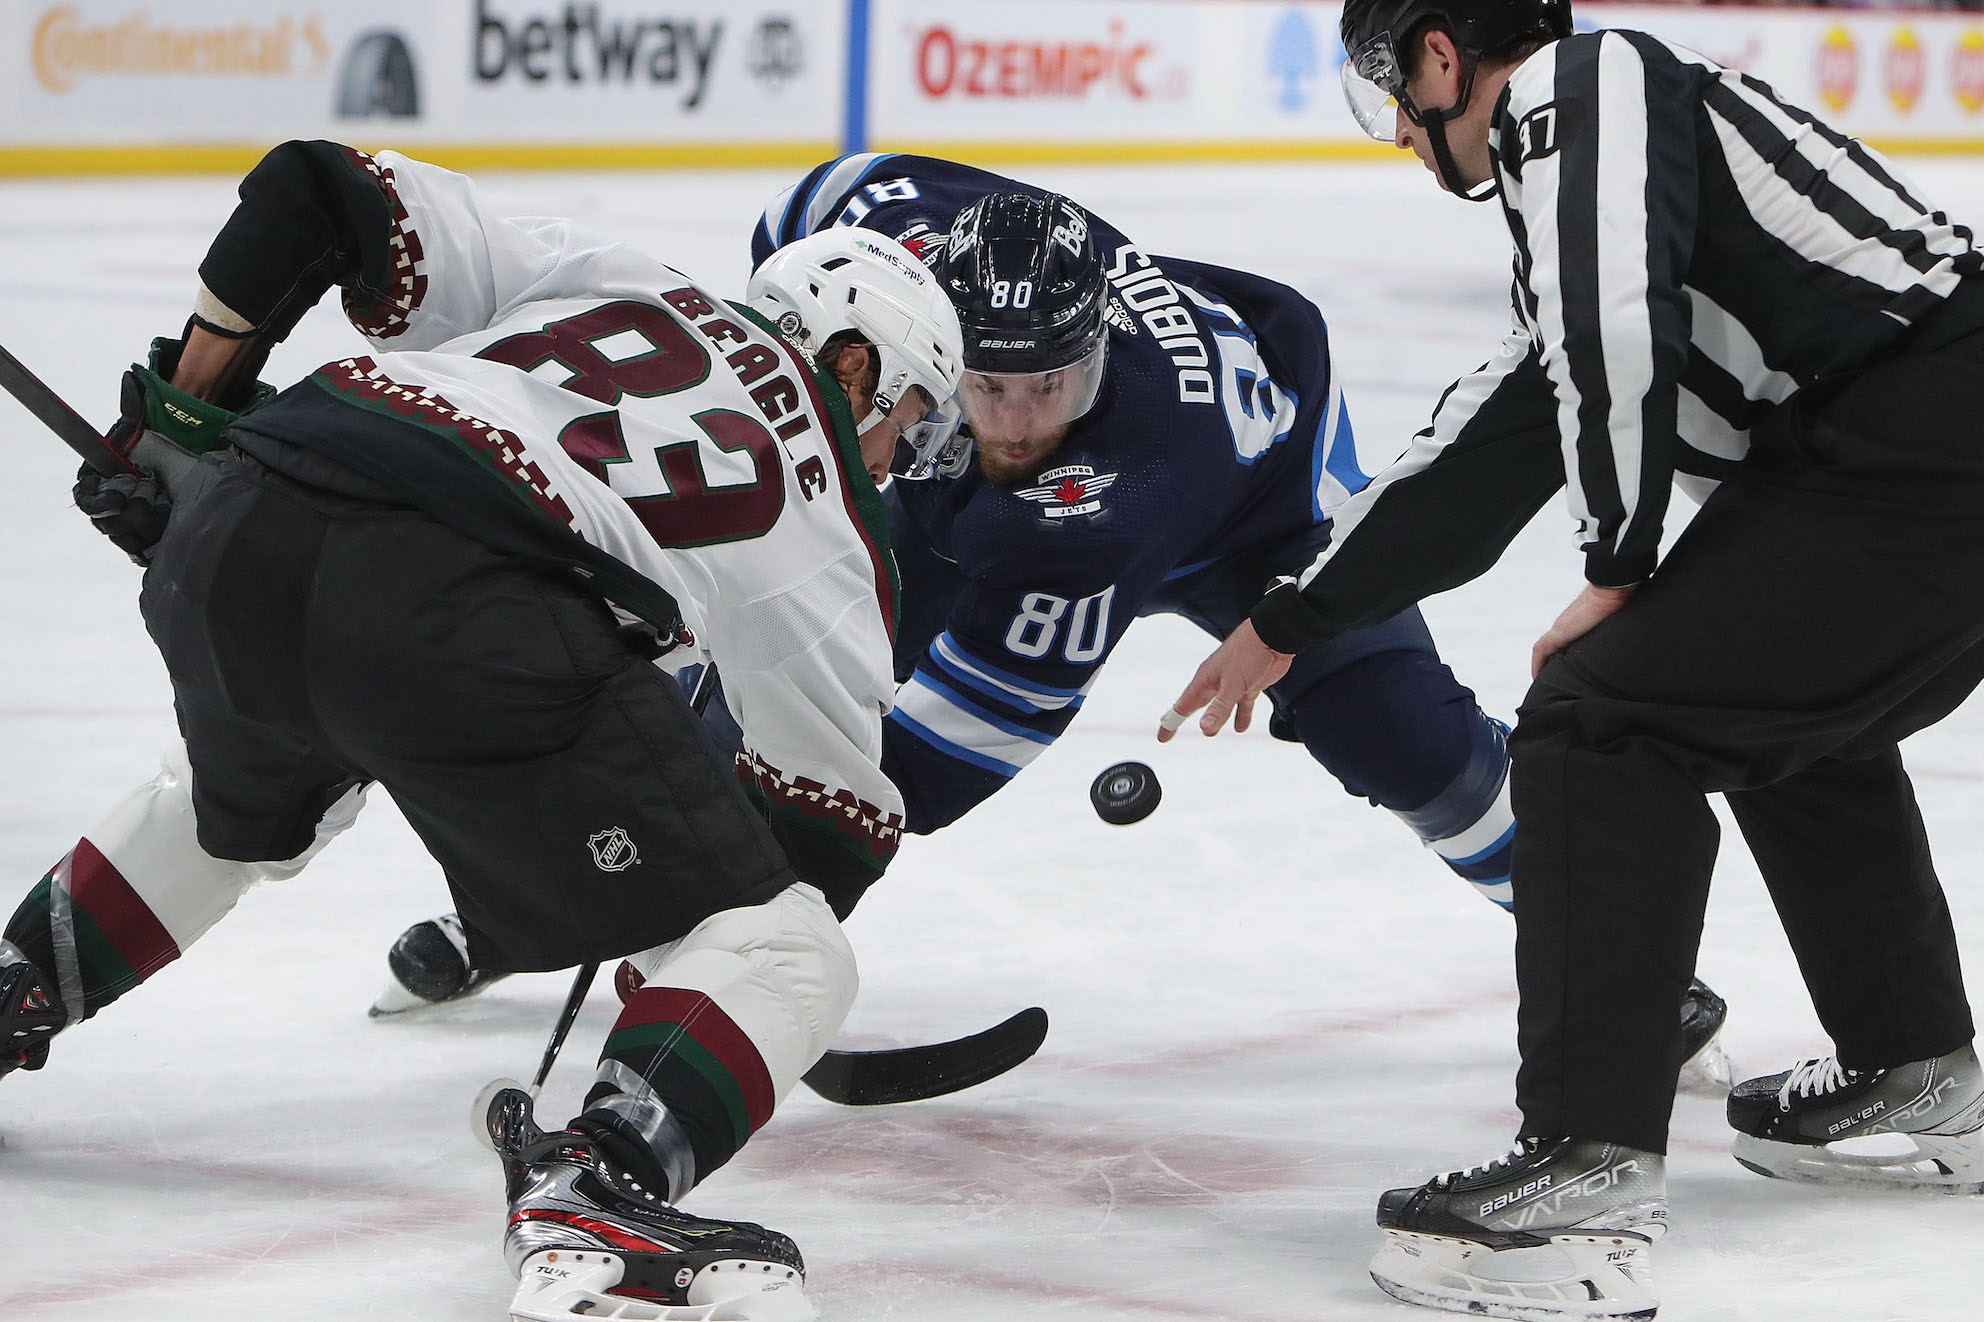 WINNIPEG, MANITOBA - MARCH 27: Jay Beagle #83 of the Arizona Coyotes faces off with Pierre-Luc Dubois #80 of the Winnipeg Jets in the second period during a game on March 27, 2022 at Canada Life Centre in Winnipeg, Manitoba, Canada. (Photo by Jason Halstead/Getty Images)